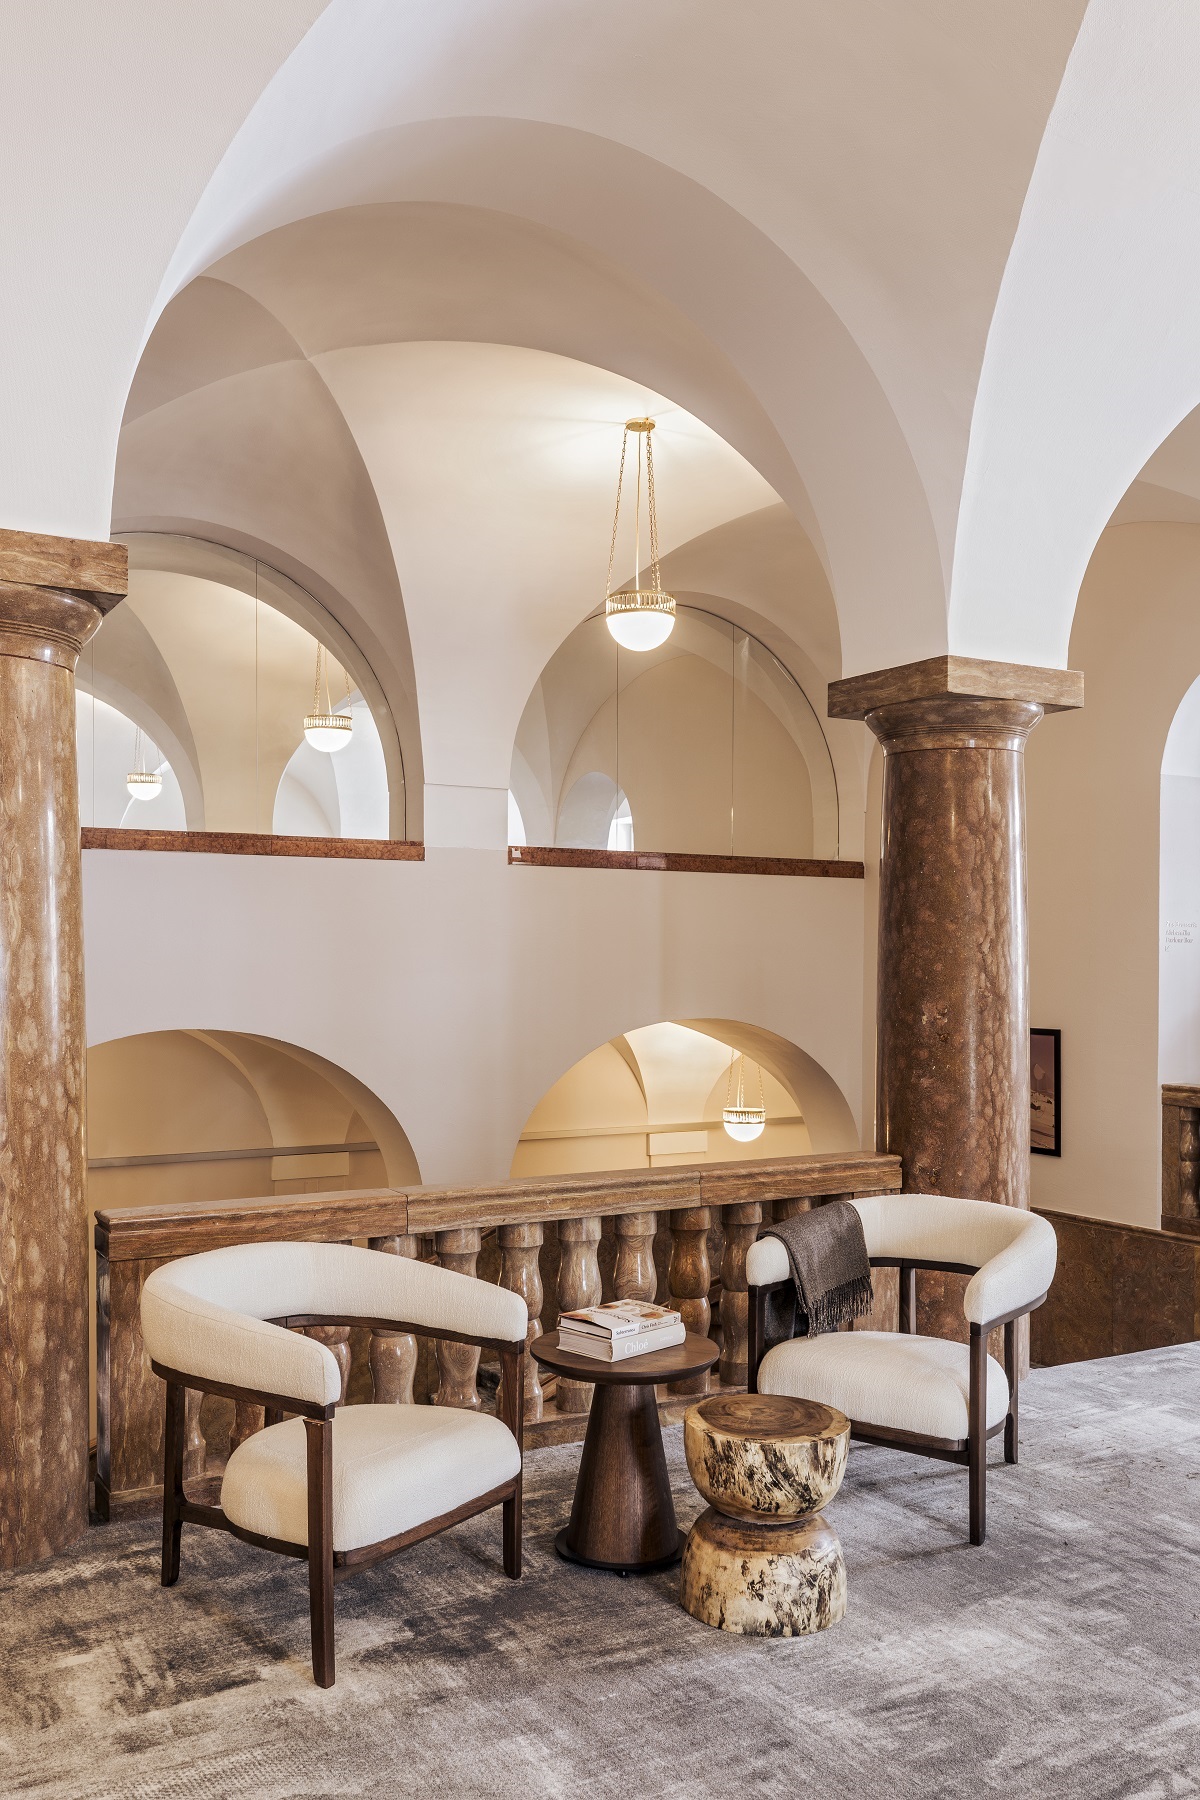 curved ceiling arches and curved cream chairs in the Faern Arosa Reception